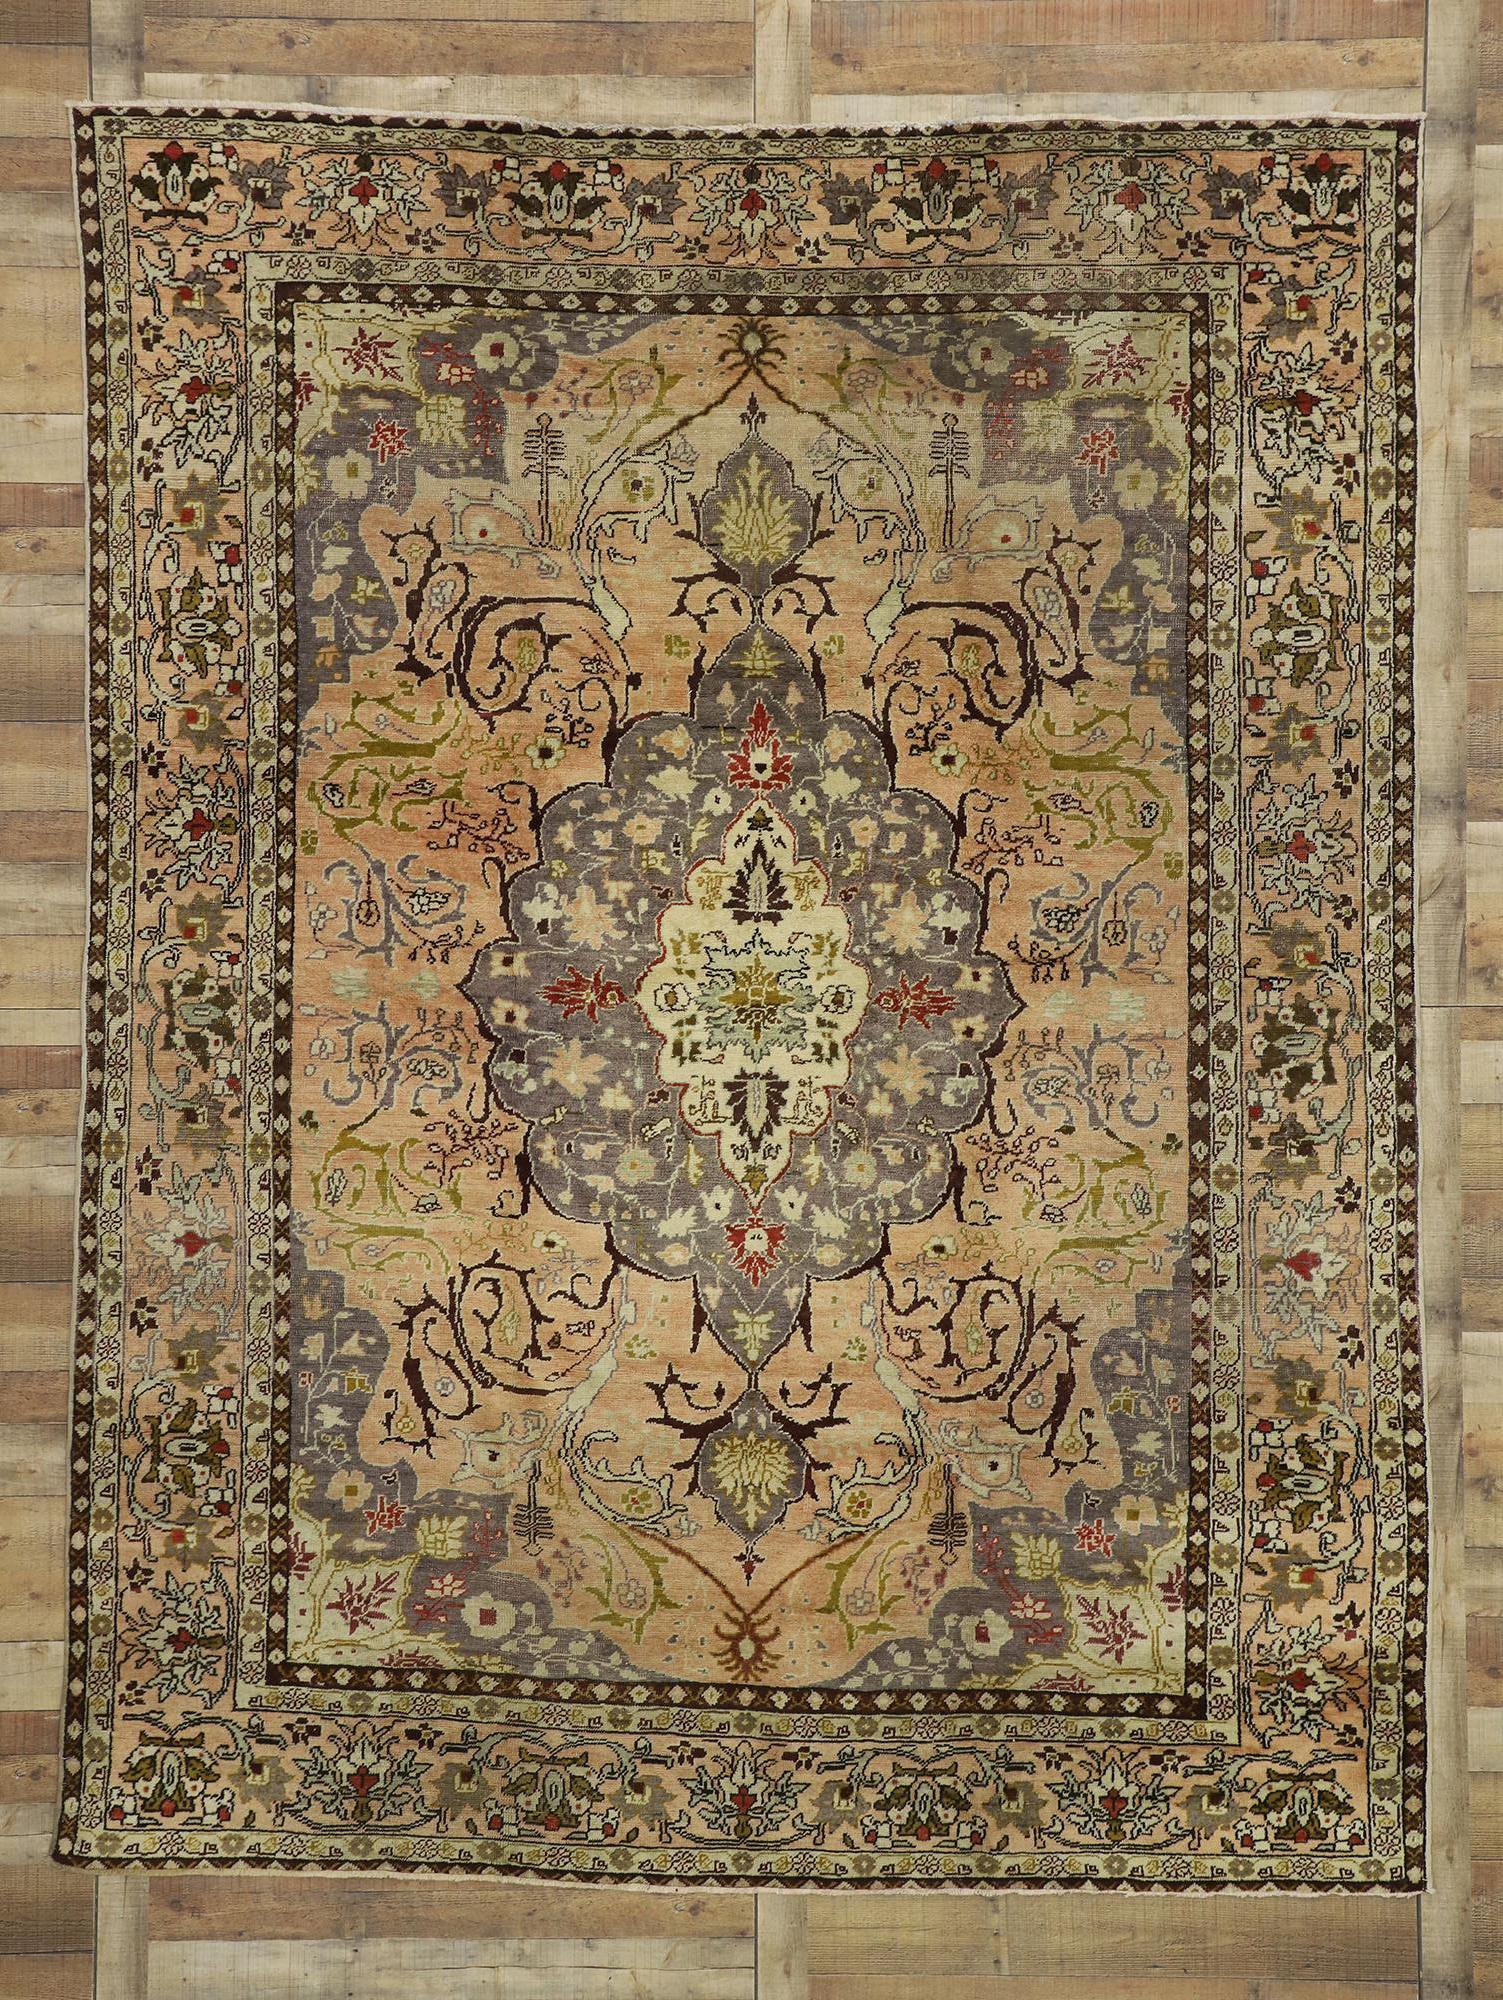 50381, antique Turkish Sivas rug with Soft French Art Nouveau style 08'03 x 10'09. Reminisce of 19th century French designs and decorative elegance, this hand knotted wool antique Turkish Sivas rug is poised to impress. Taking center stage is a